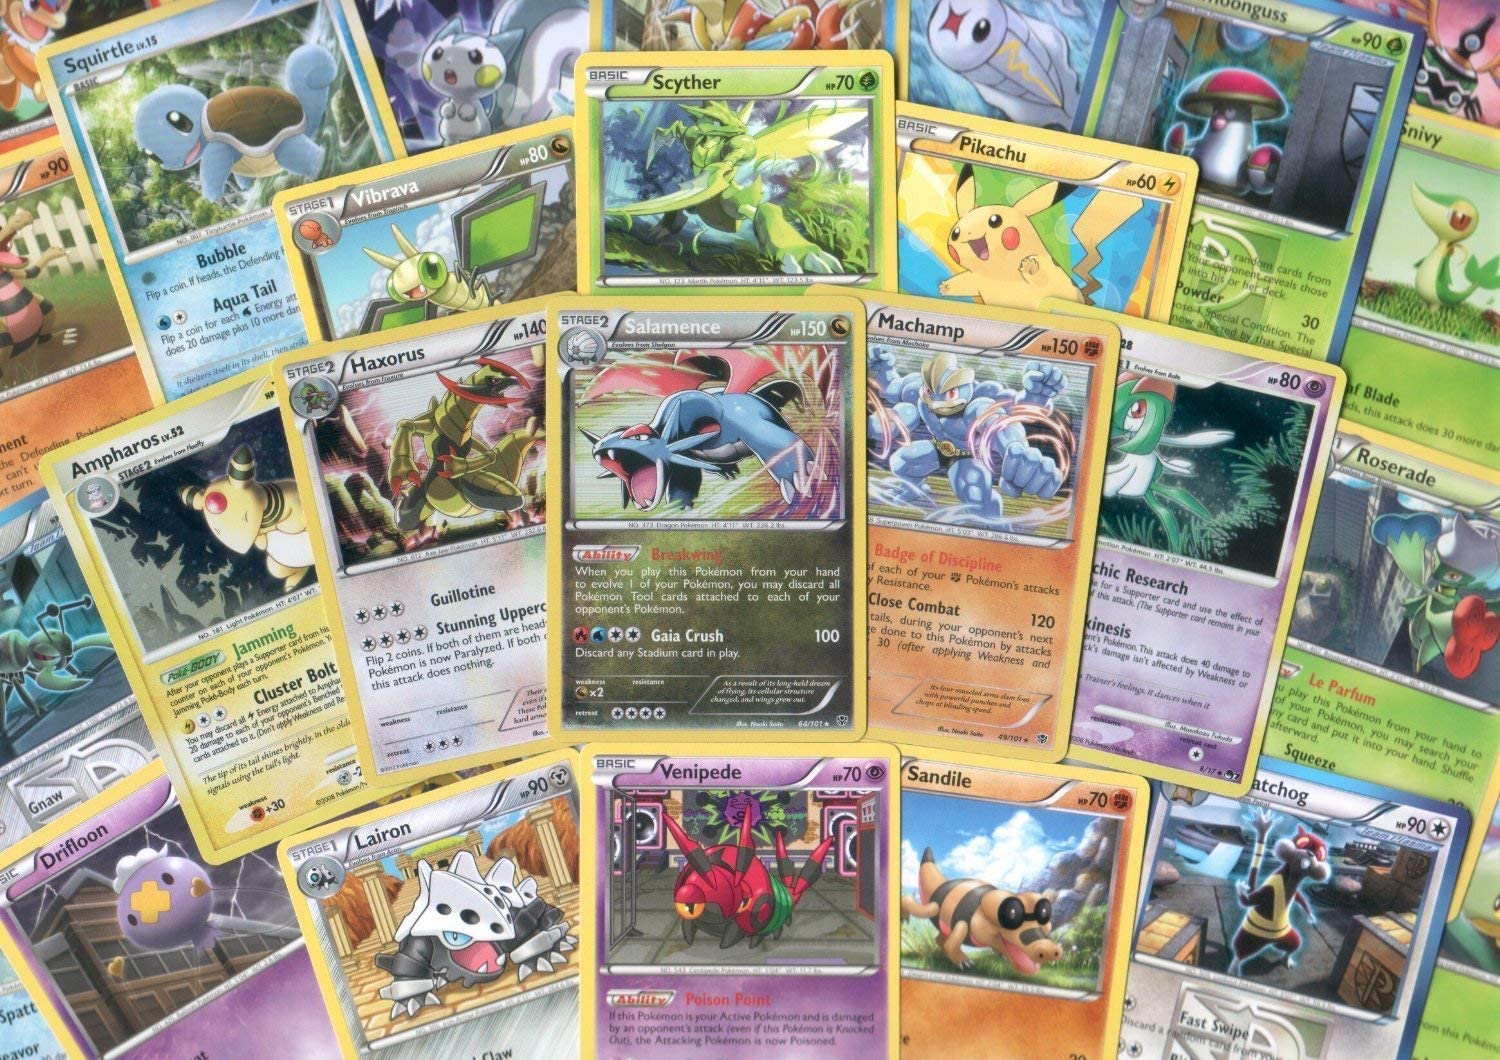 Pokemon TCG: 3 Booster Packs - 30 Cards Total| Value Pack Includes 3 Blister Packs of Random Cards | 100% Authentic Branded Pokemon Expansion Packs | Random Chance at Rares & Holofoils - image 4 of 4